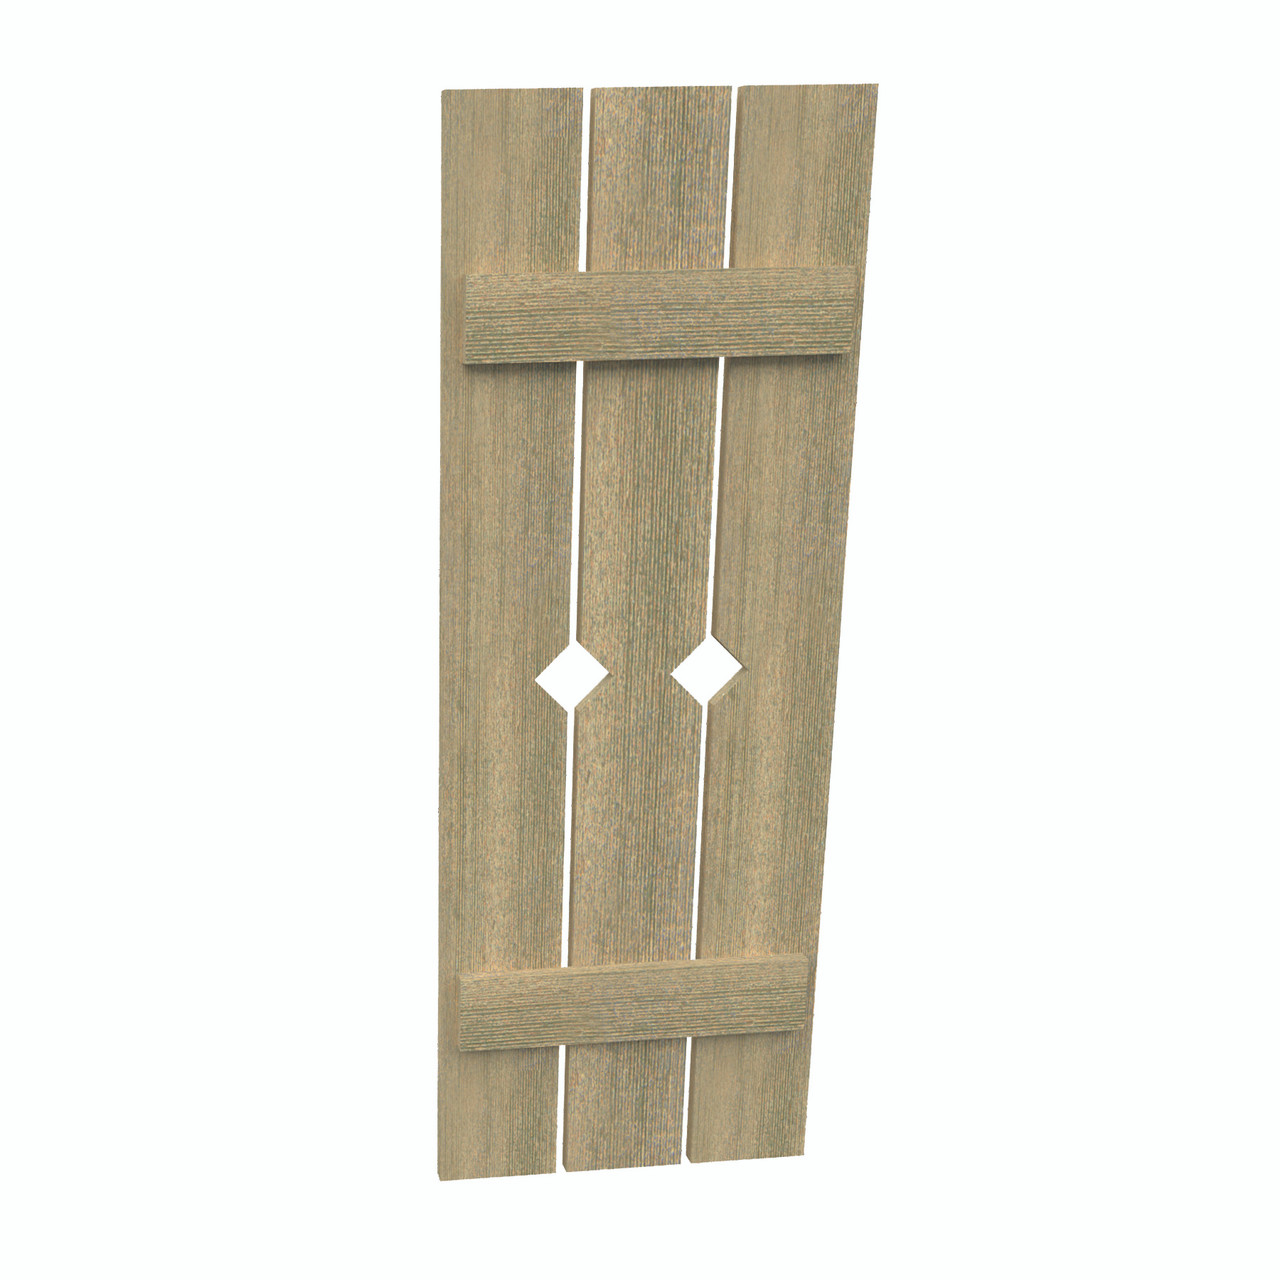 18 inch by 86 inch Plank Shutter with 3-Plank, Diamond